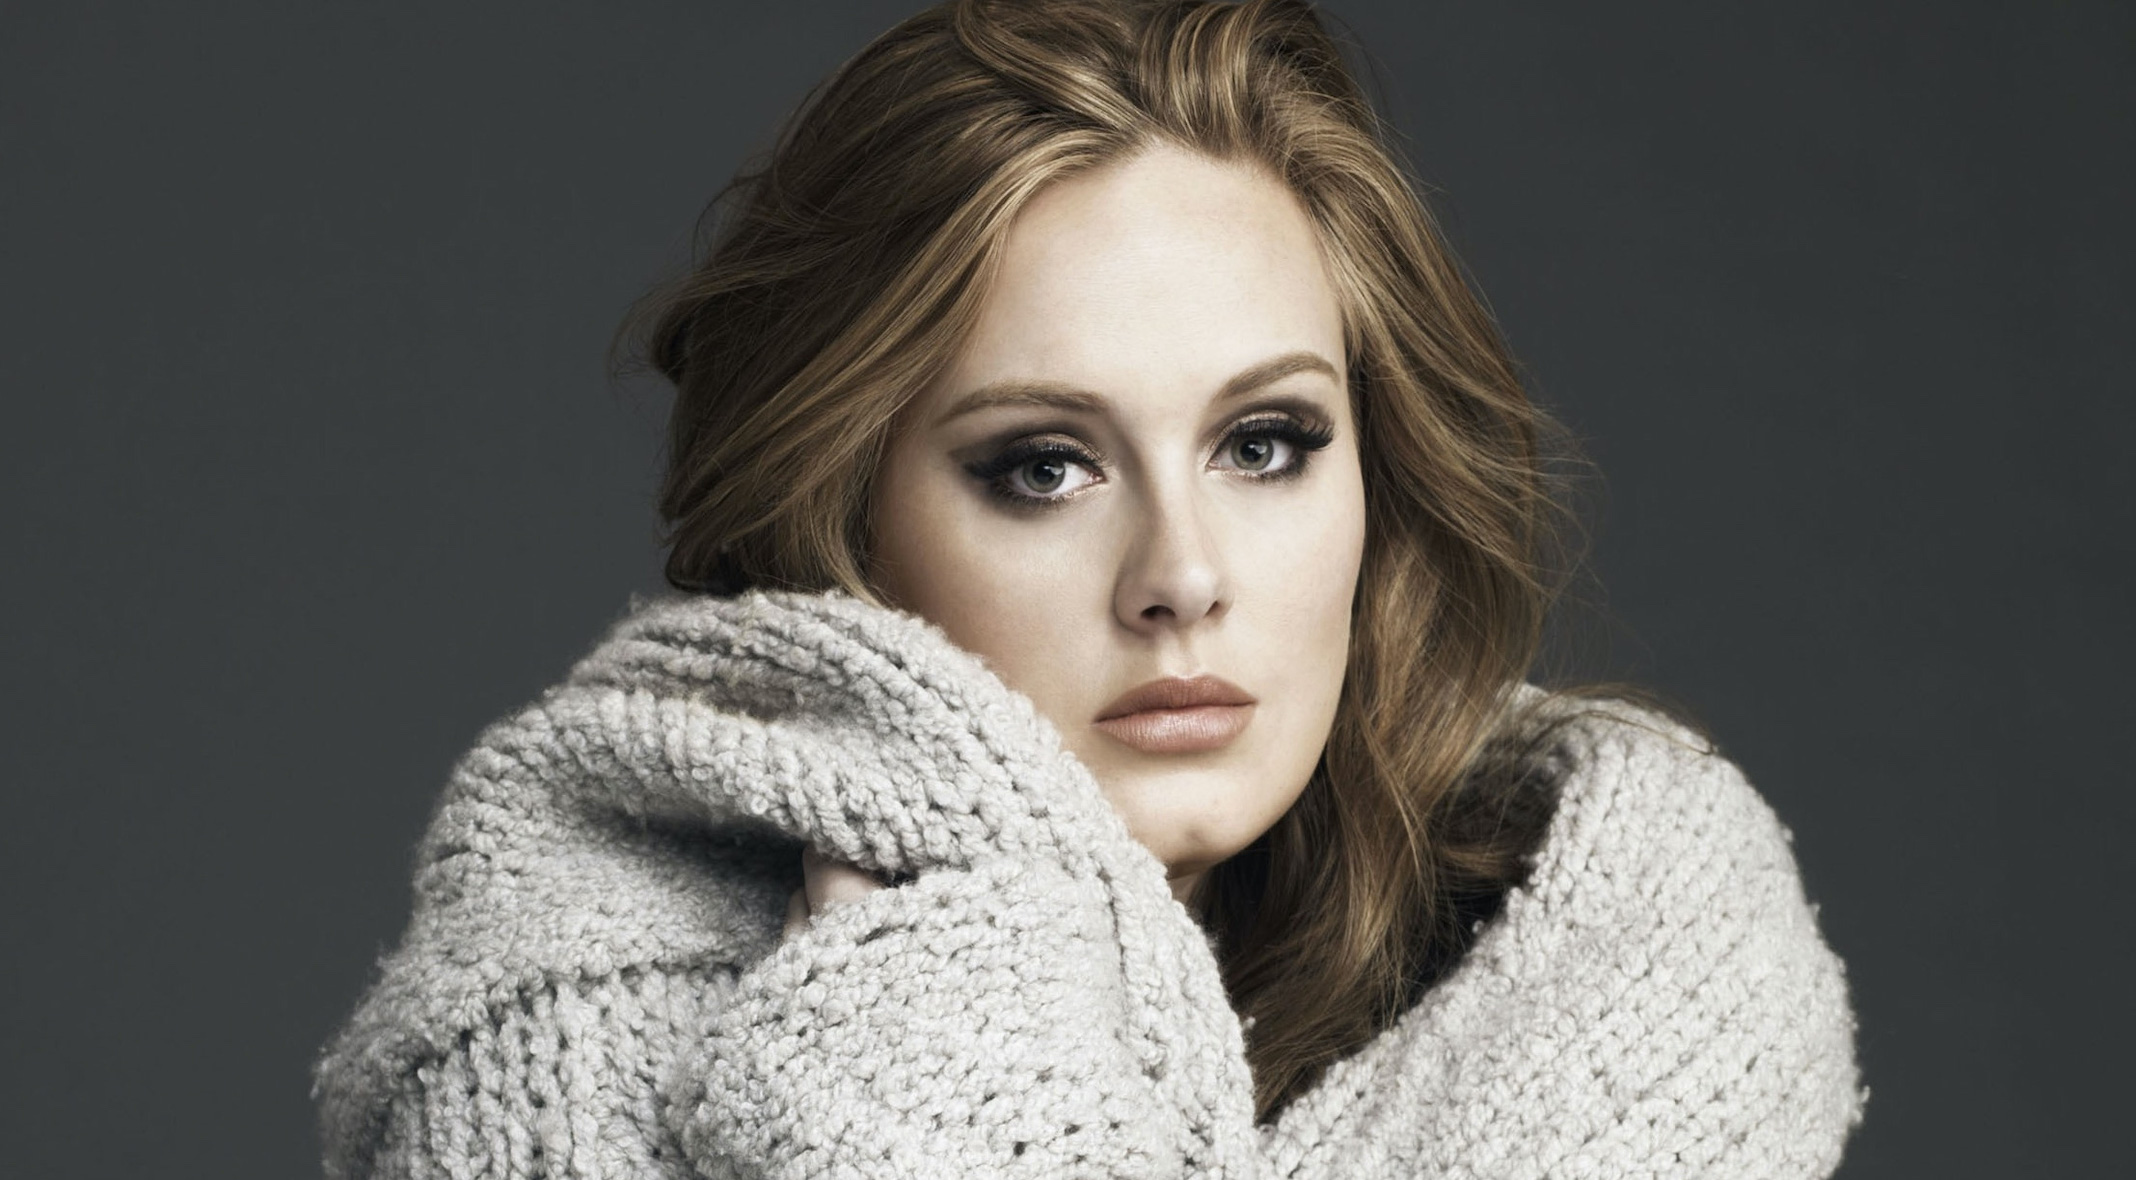 New Adele album '30' release date, title, tracklist, songs The Forty